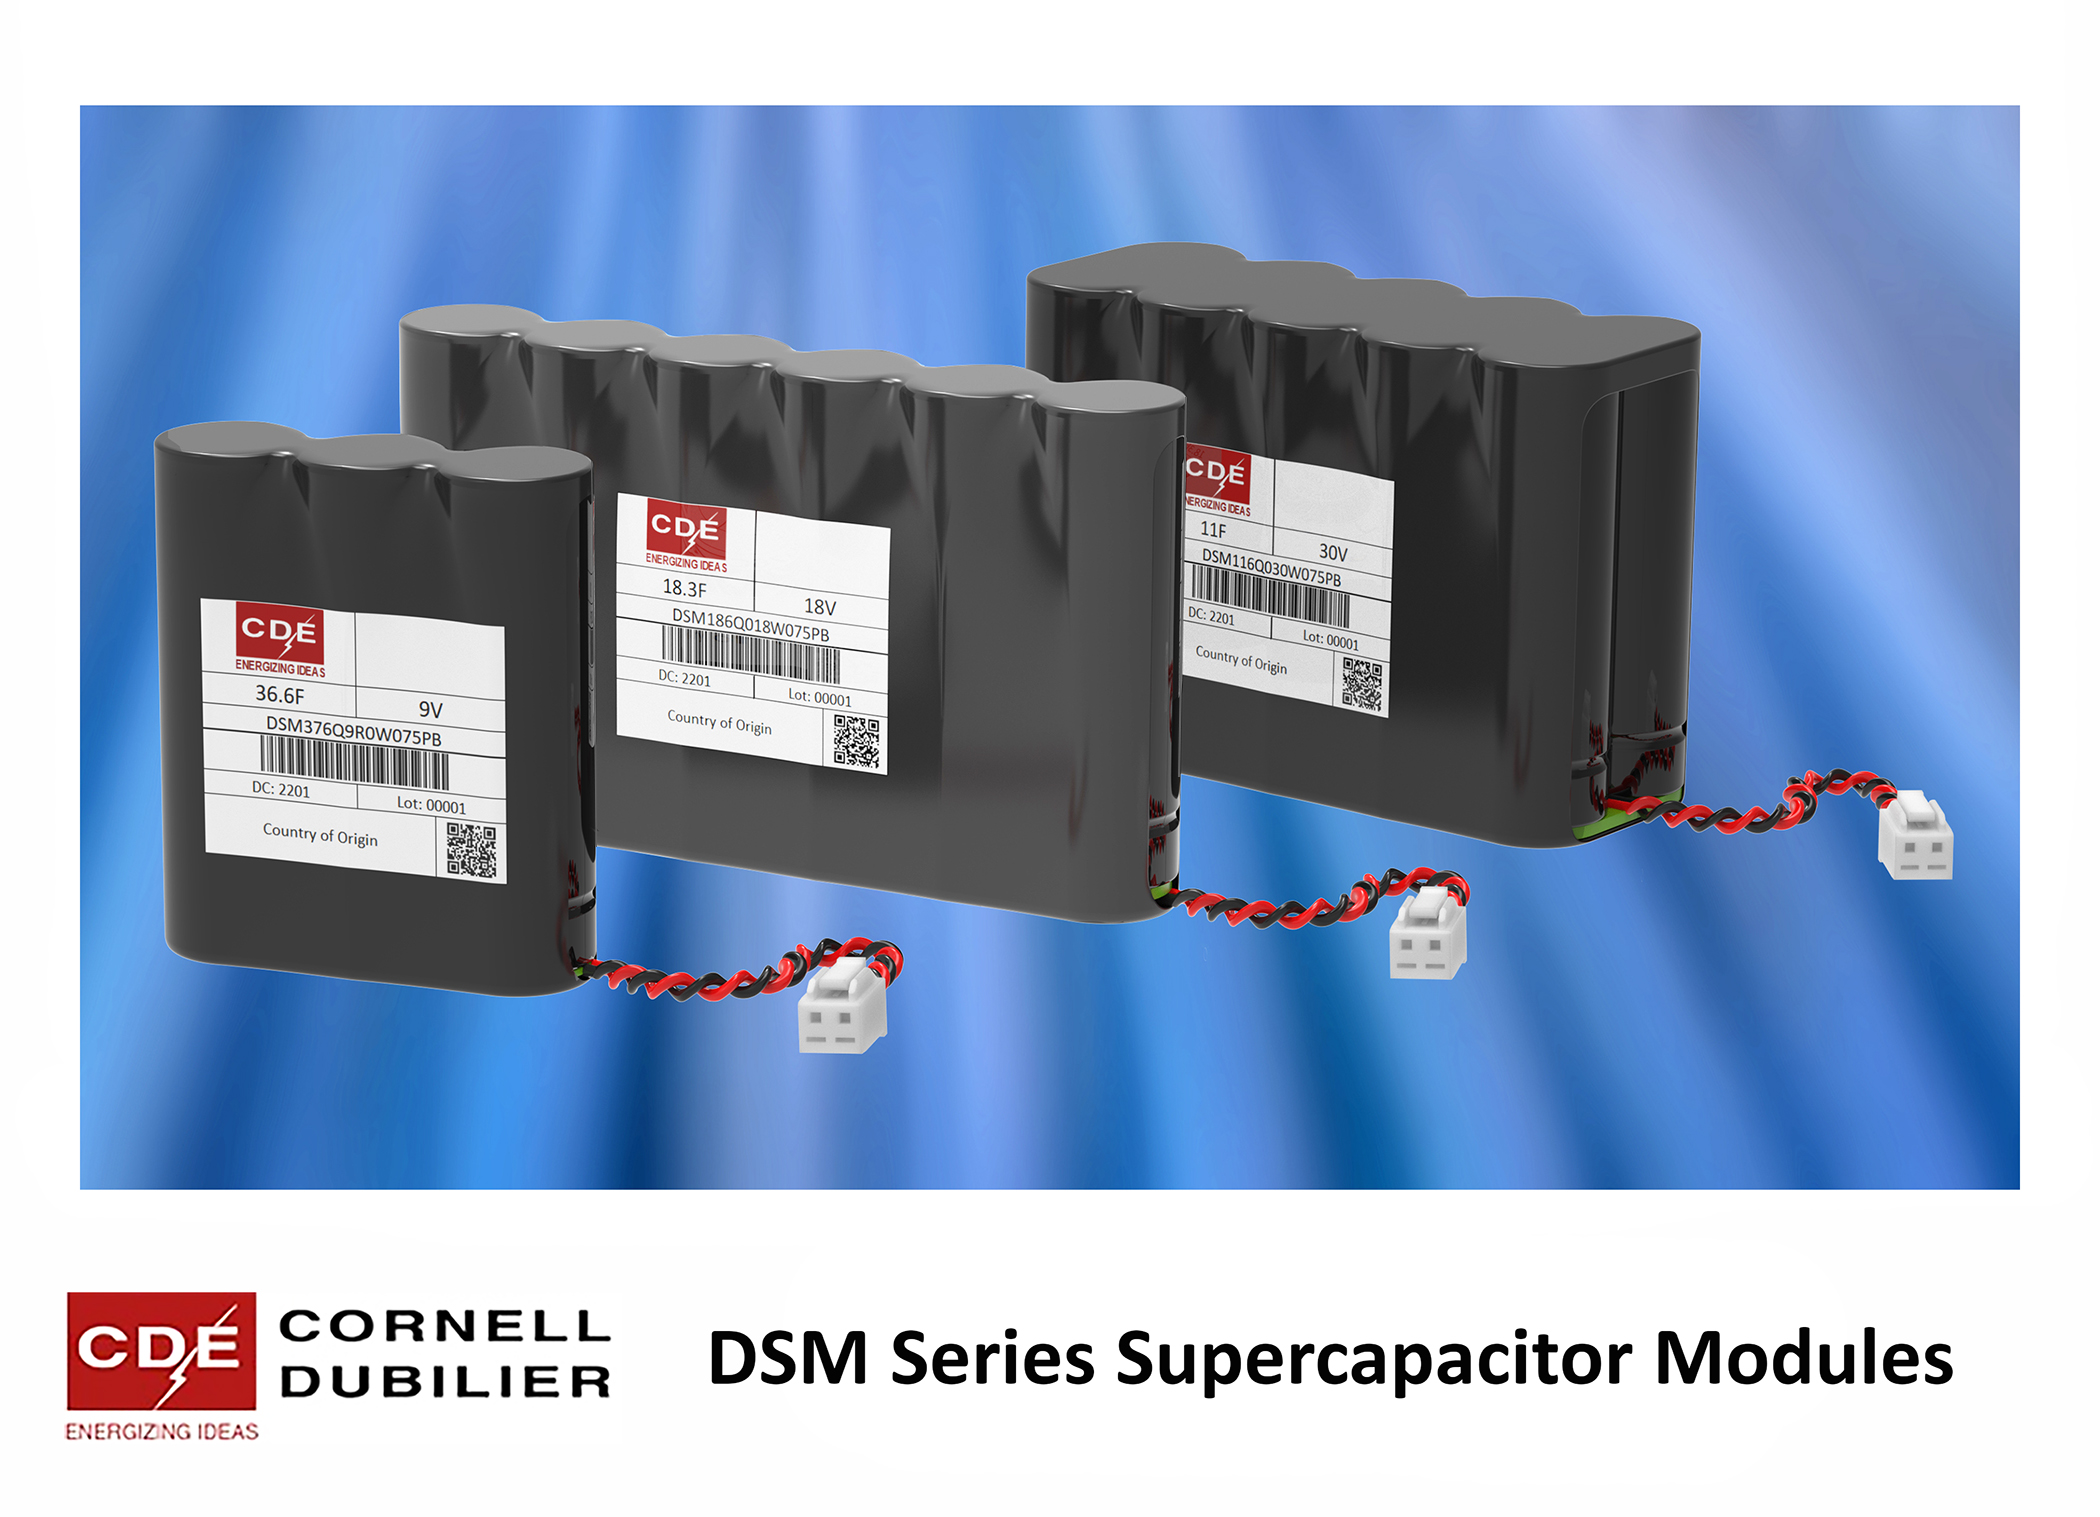 CDE Introduces Standard Supercapacitor Modules